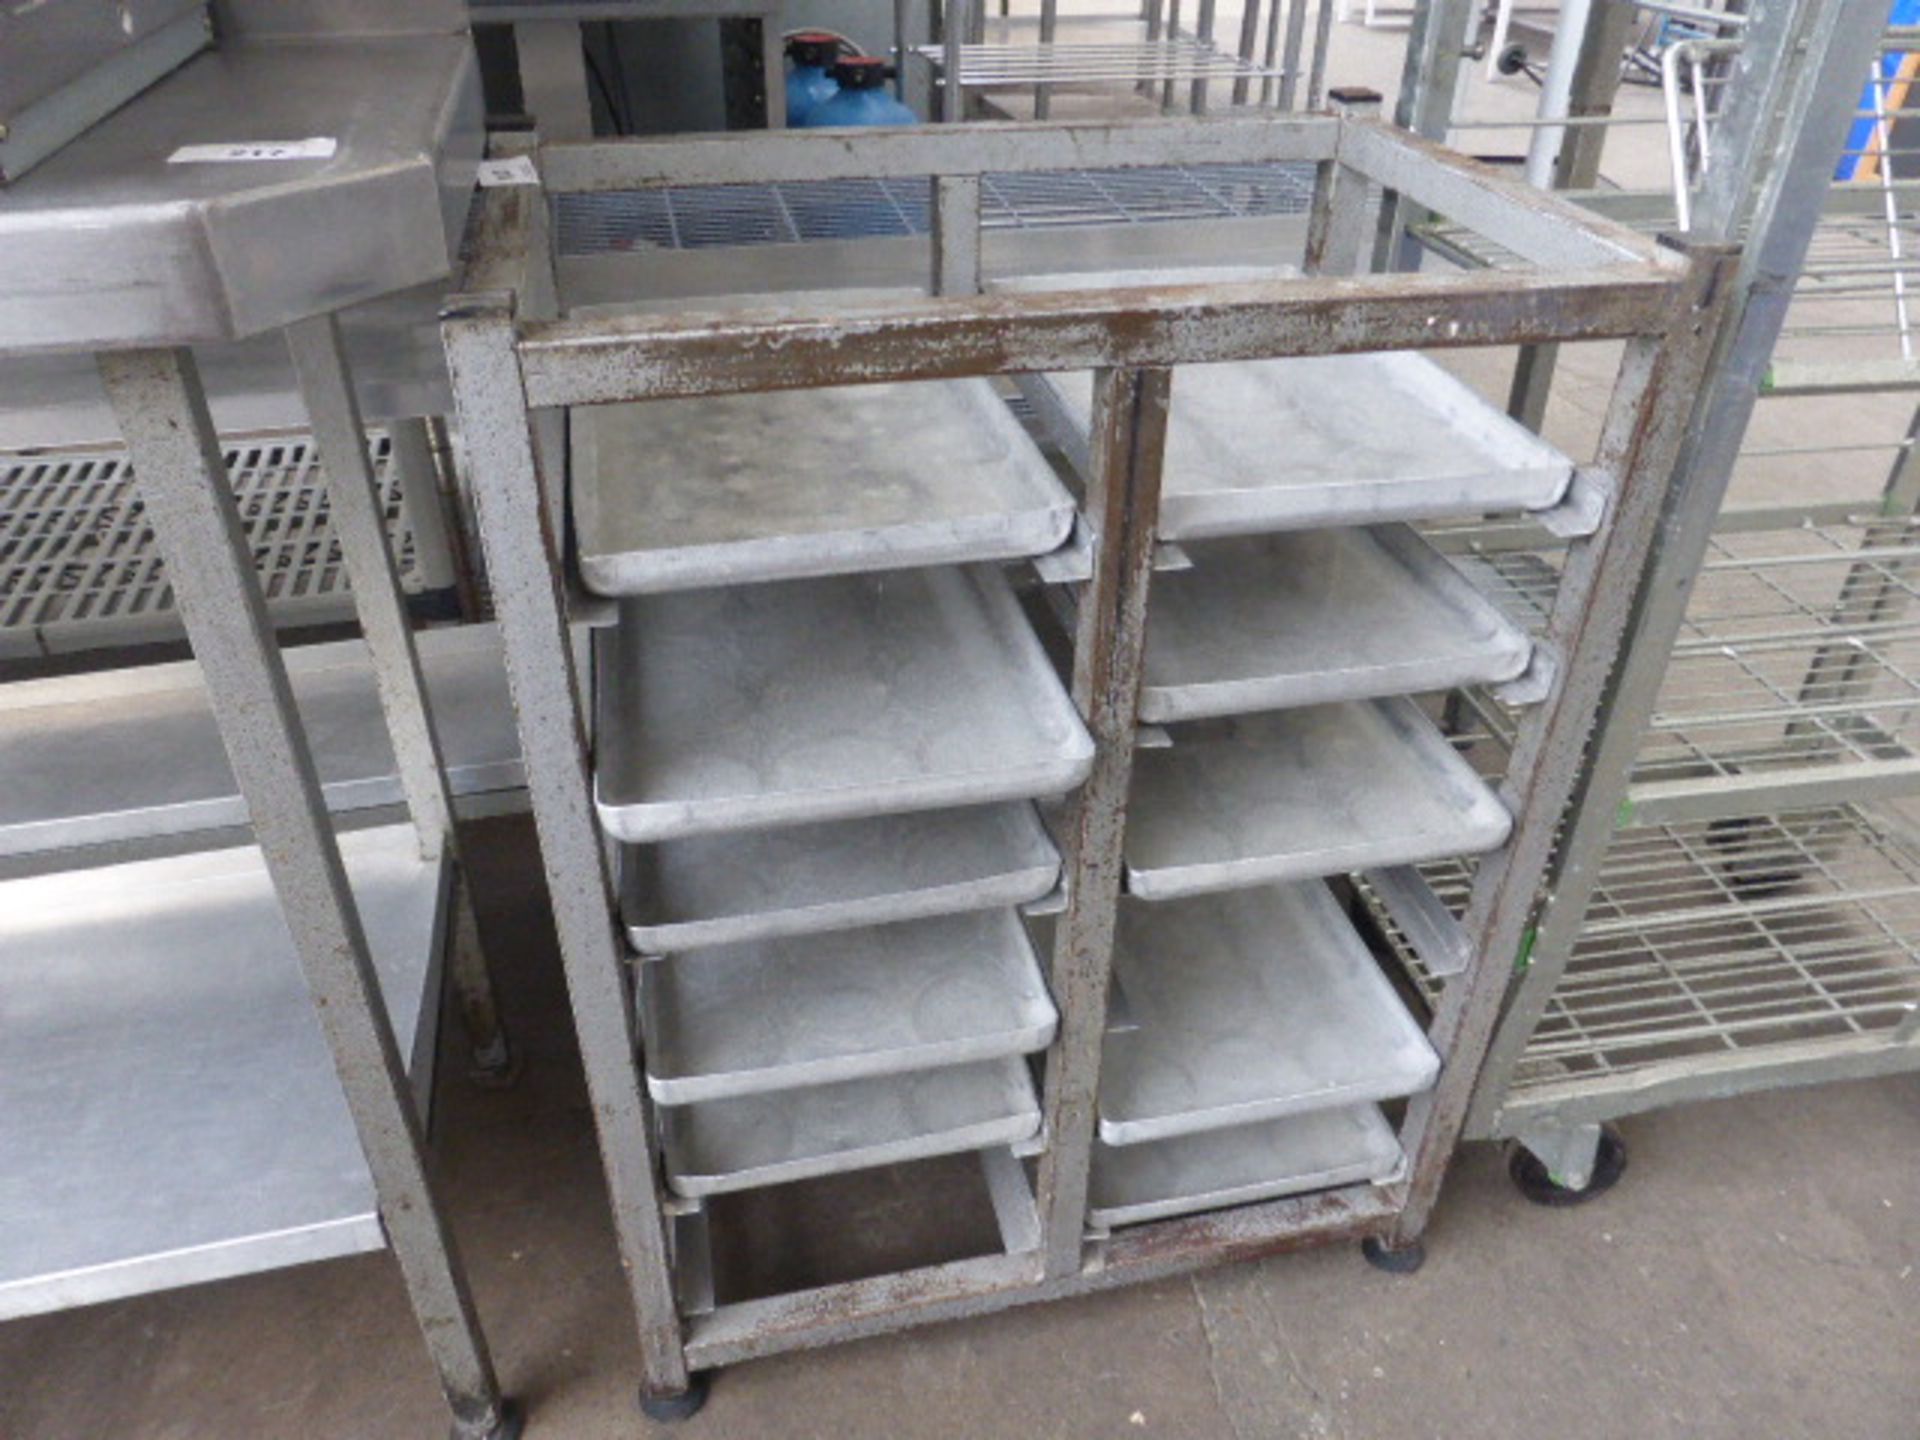 Small stand with 10 aluminium baking trays